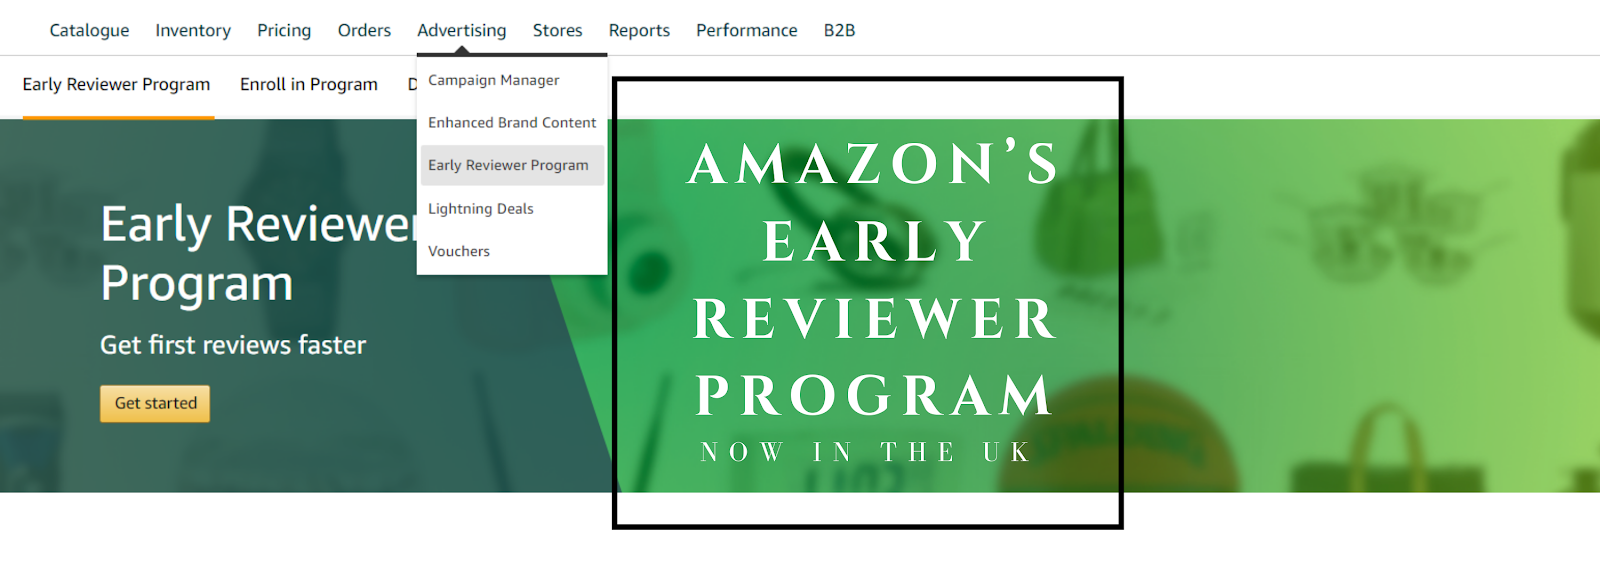 Amazon Early Reviewer Program - 10 Things You Need To Know - What is Amazon's  Early Reviewer Program - YouTube